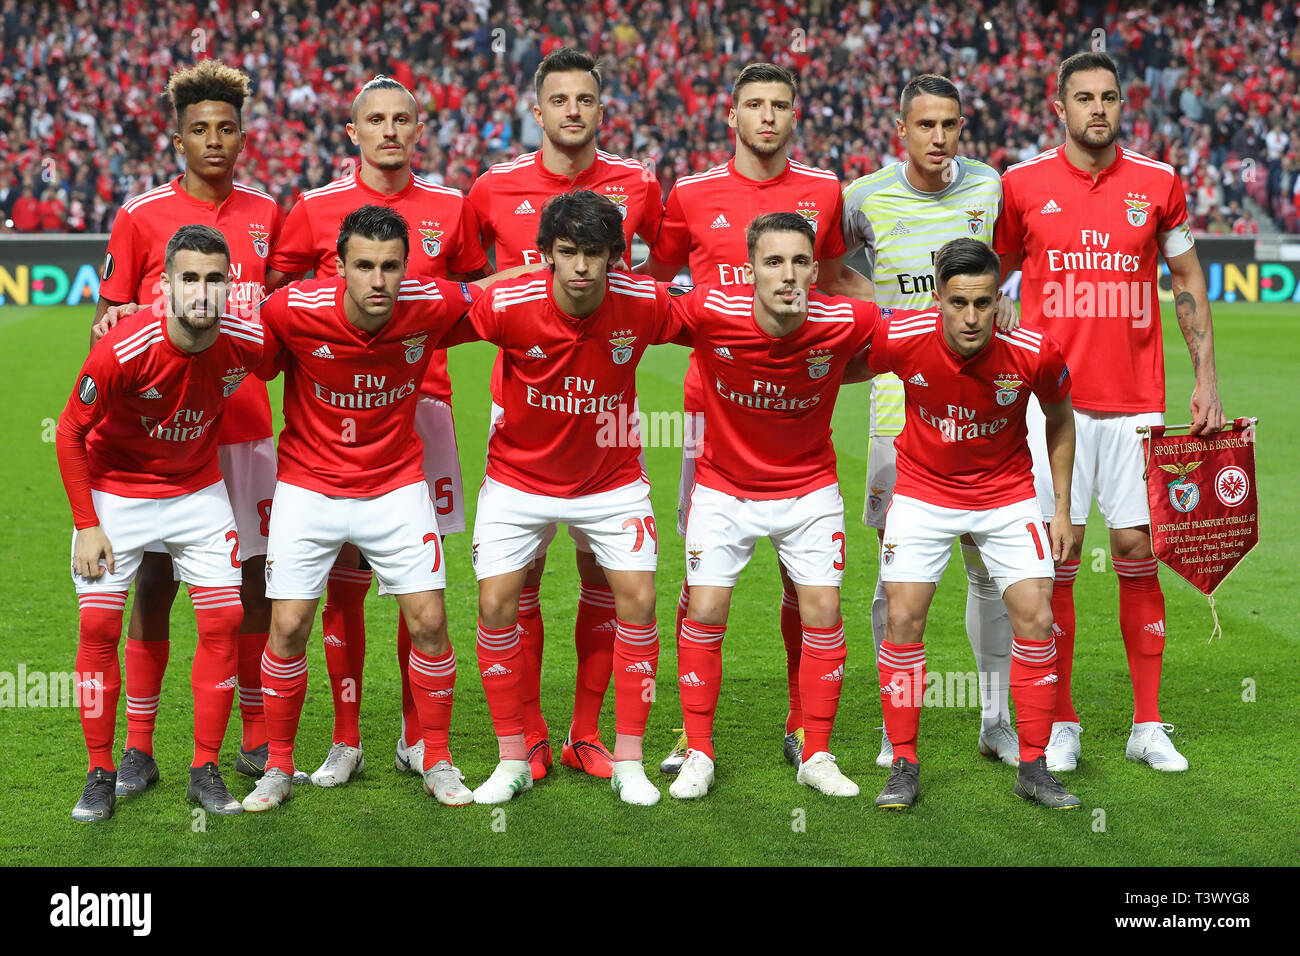 Benfica Football Team High Resolution Stock Photography And Images Alamy [ 956 x 1300 Pixel ]